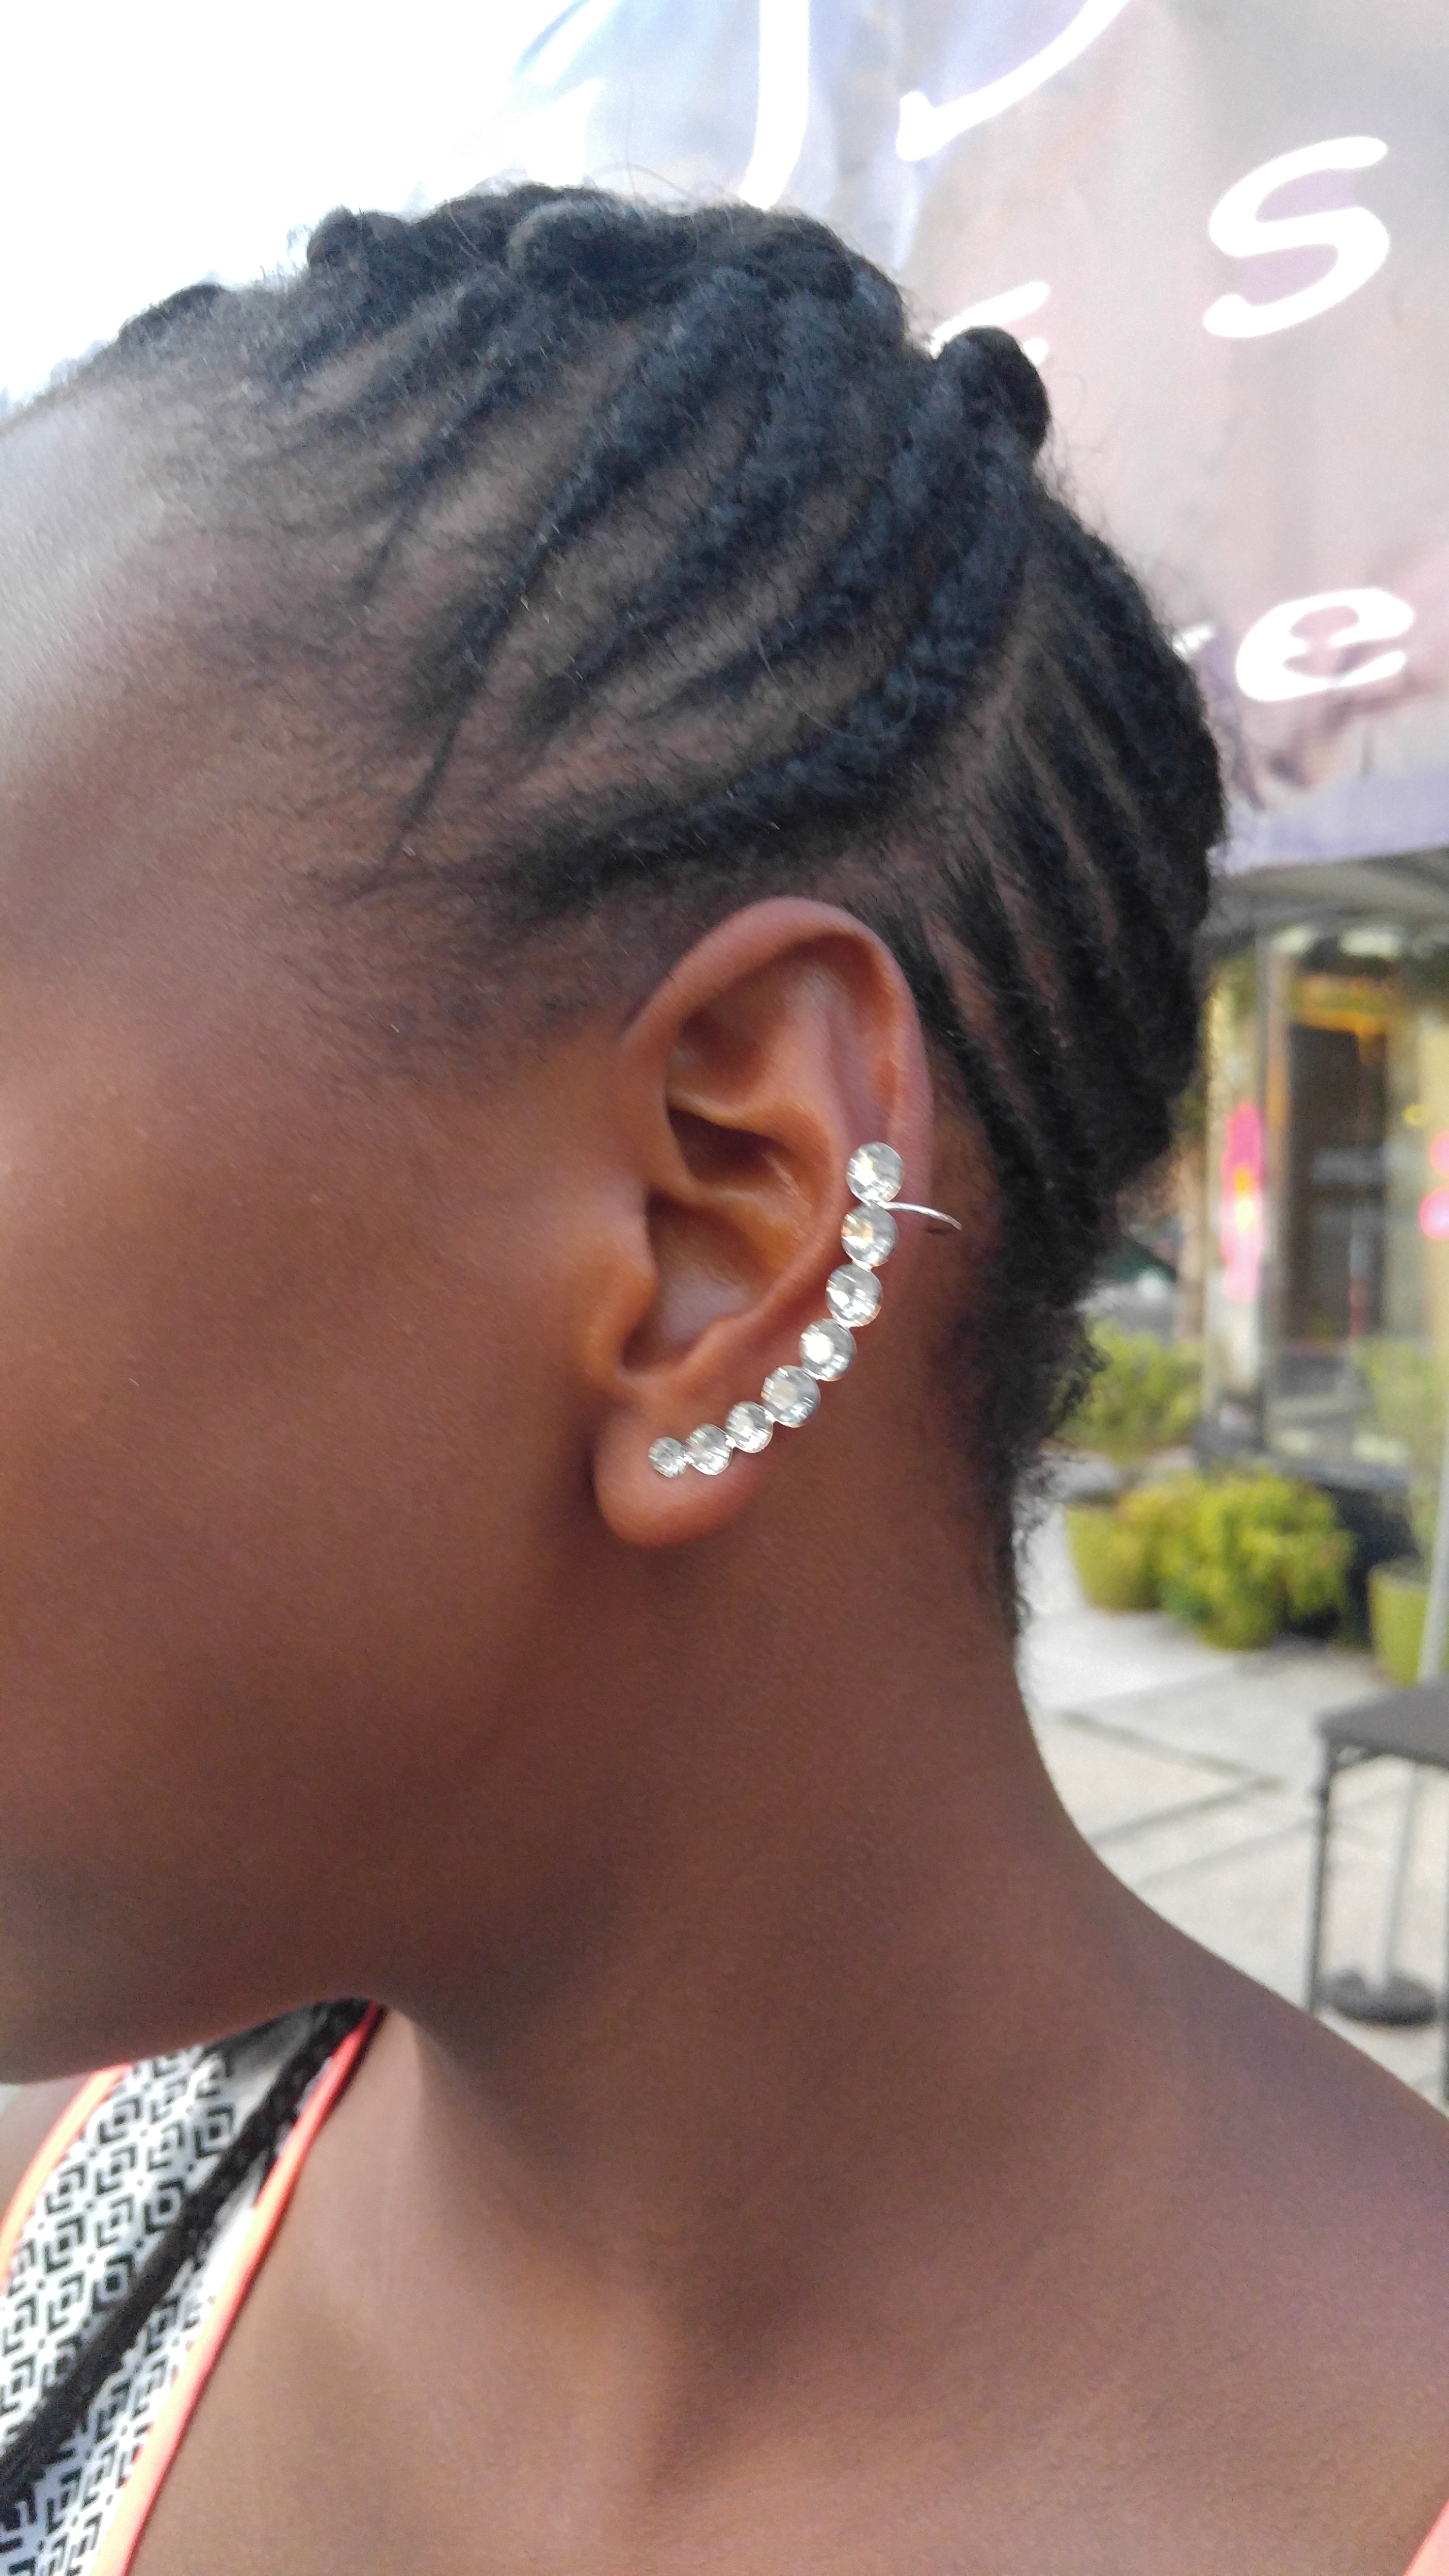 Customer wears earcuffs purchased at Nikus Booth, Sept. 2016